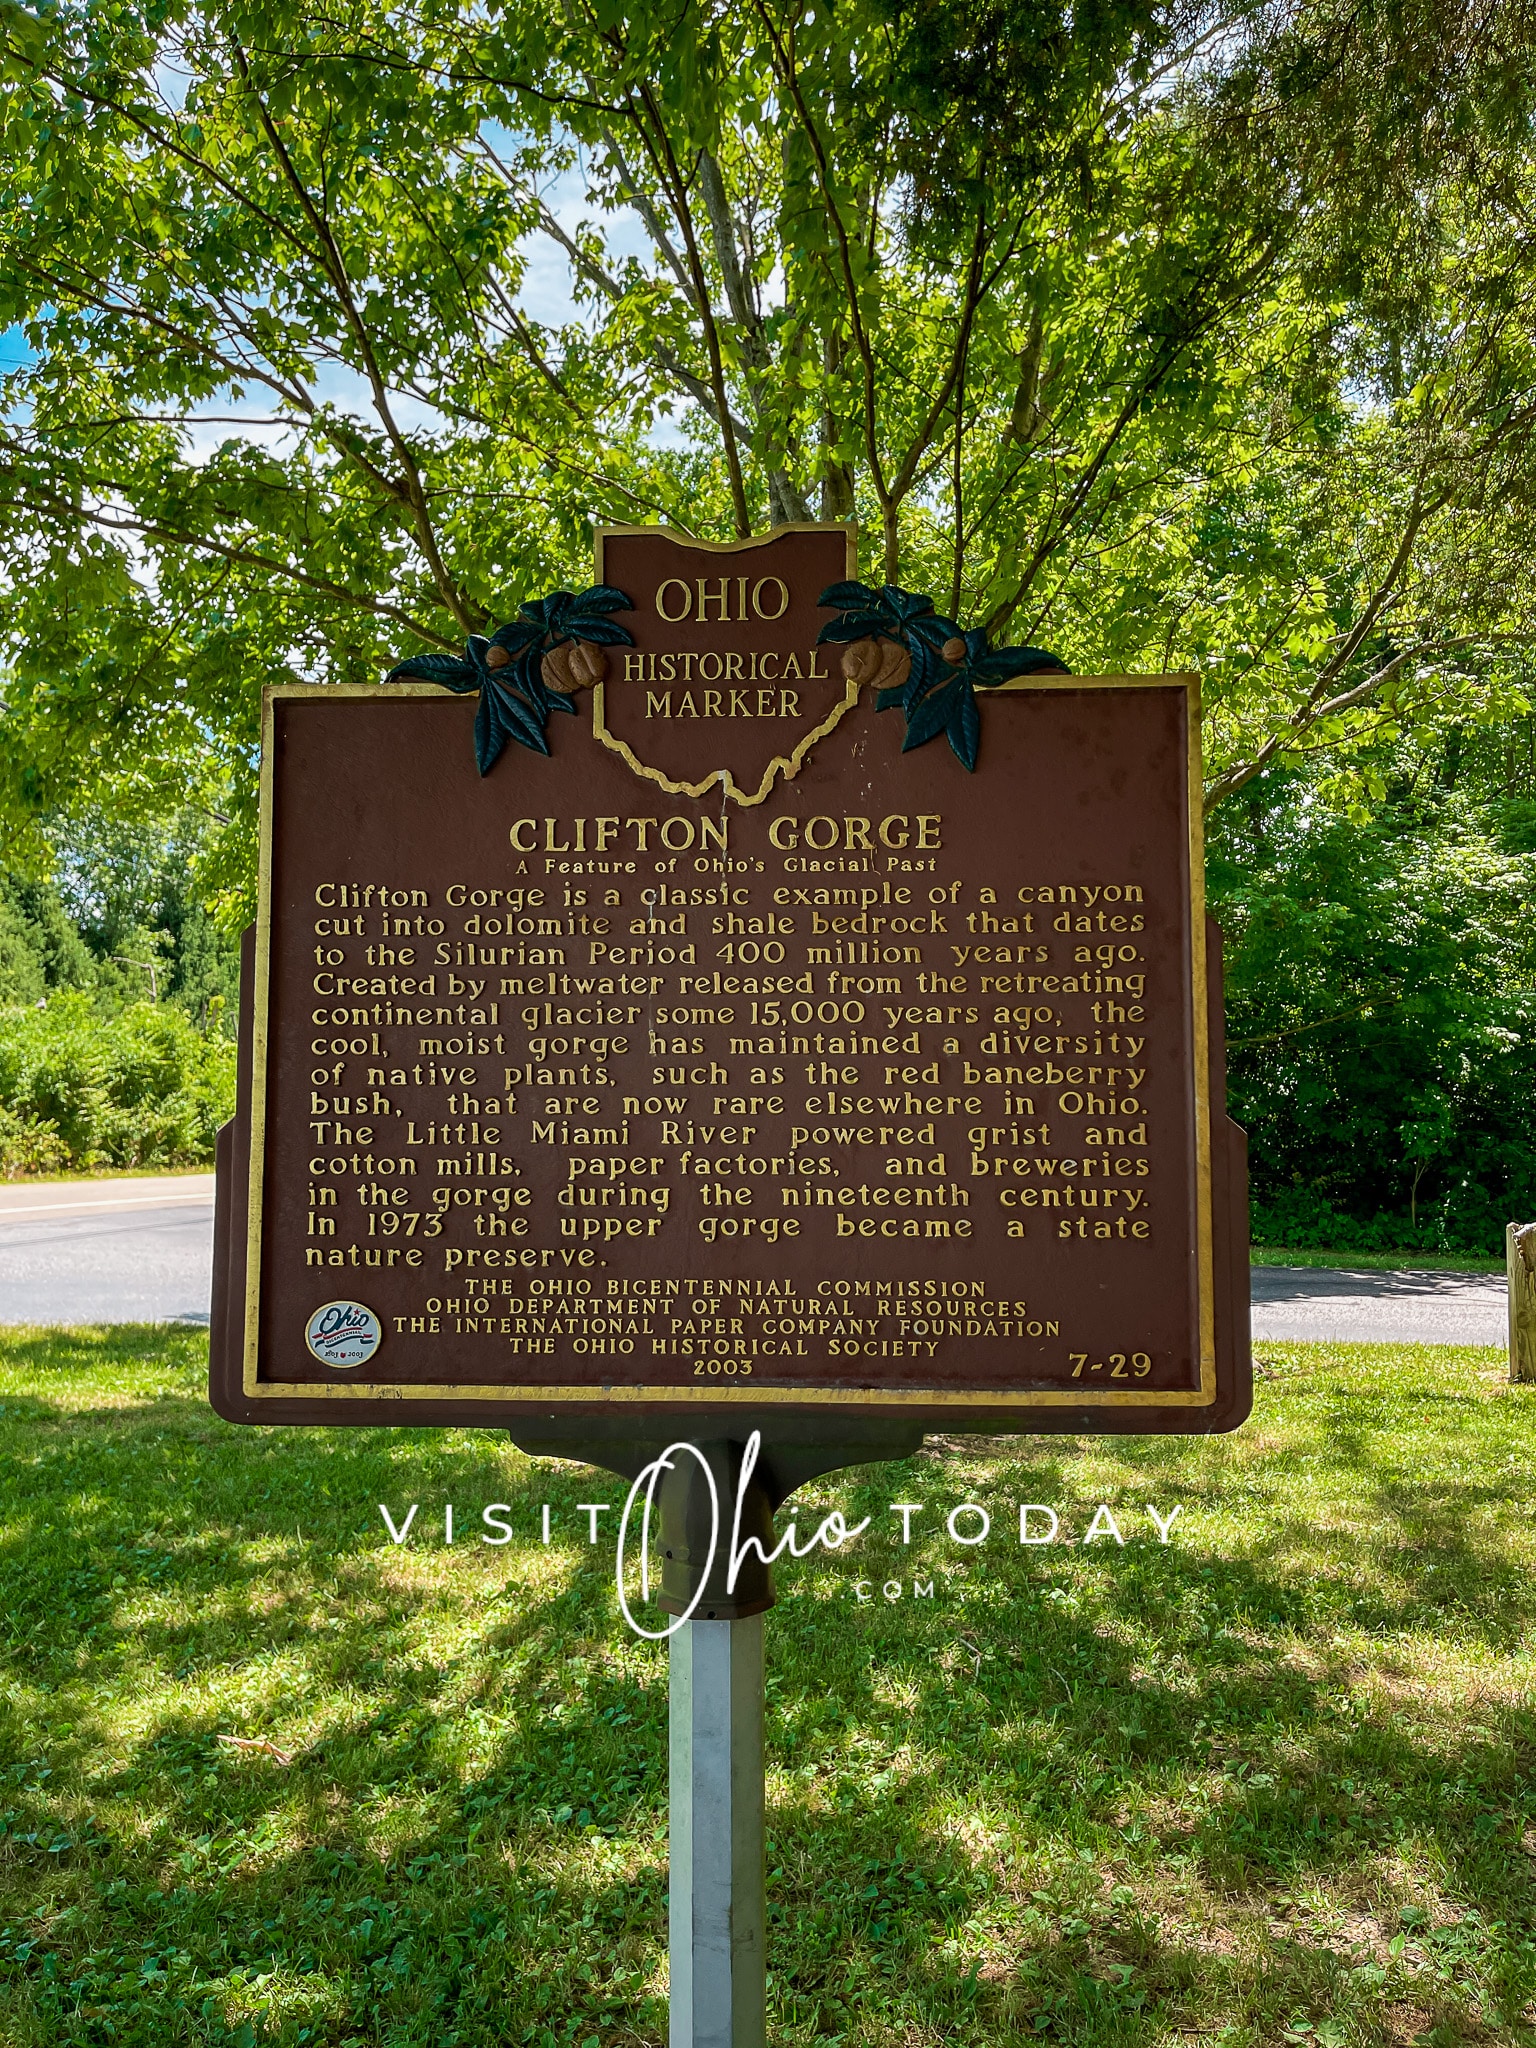 vertical photo of a historical marker at Clifton gorge: Clifton Gorge is a classic example of a canyon cut into dolomite and shale bedrock that dates to the Silurian Period 400 million years ago. Created by meltwater released from the retreating continental glacier some 15,000 years ago, the cool, moist gorge has maintained a diversity of native plants, such as the red baneberry bush, that are not rare elsewhere in Ohio. The Little Miami River powered grist and cotton mills, paper factories, and breweries in the gorge during the nineteenth century. In 1973 the upper gorge became a state nature preserve.